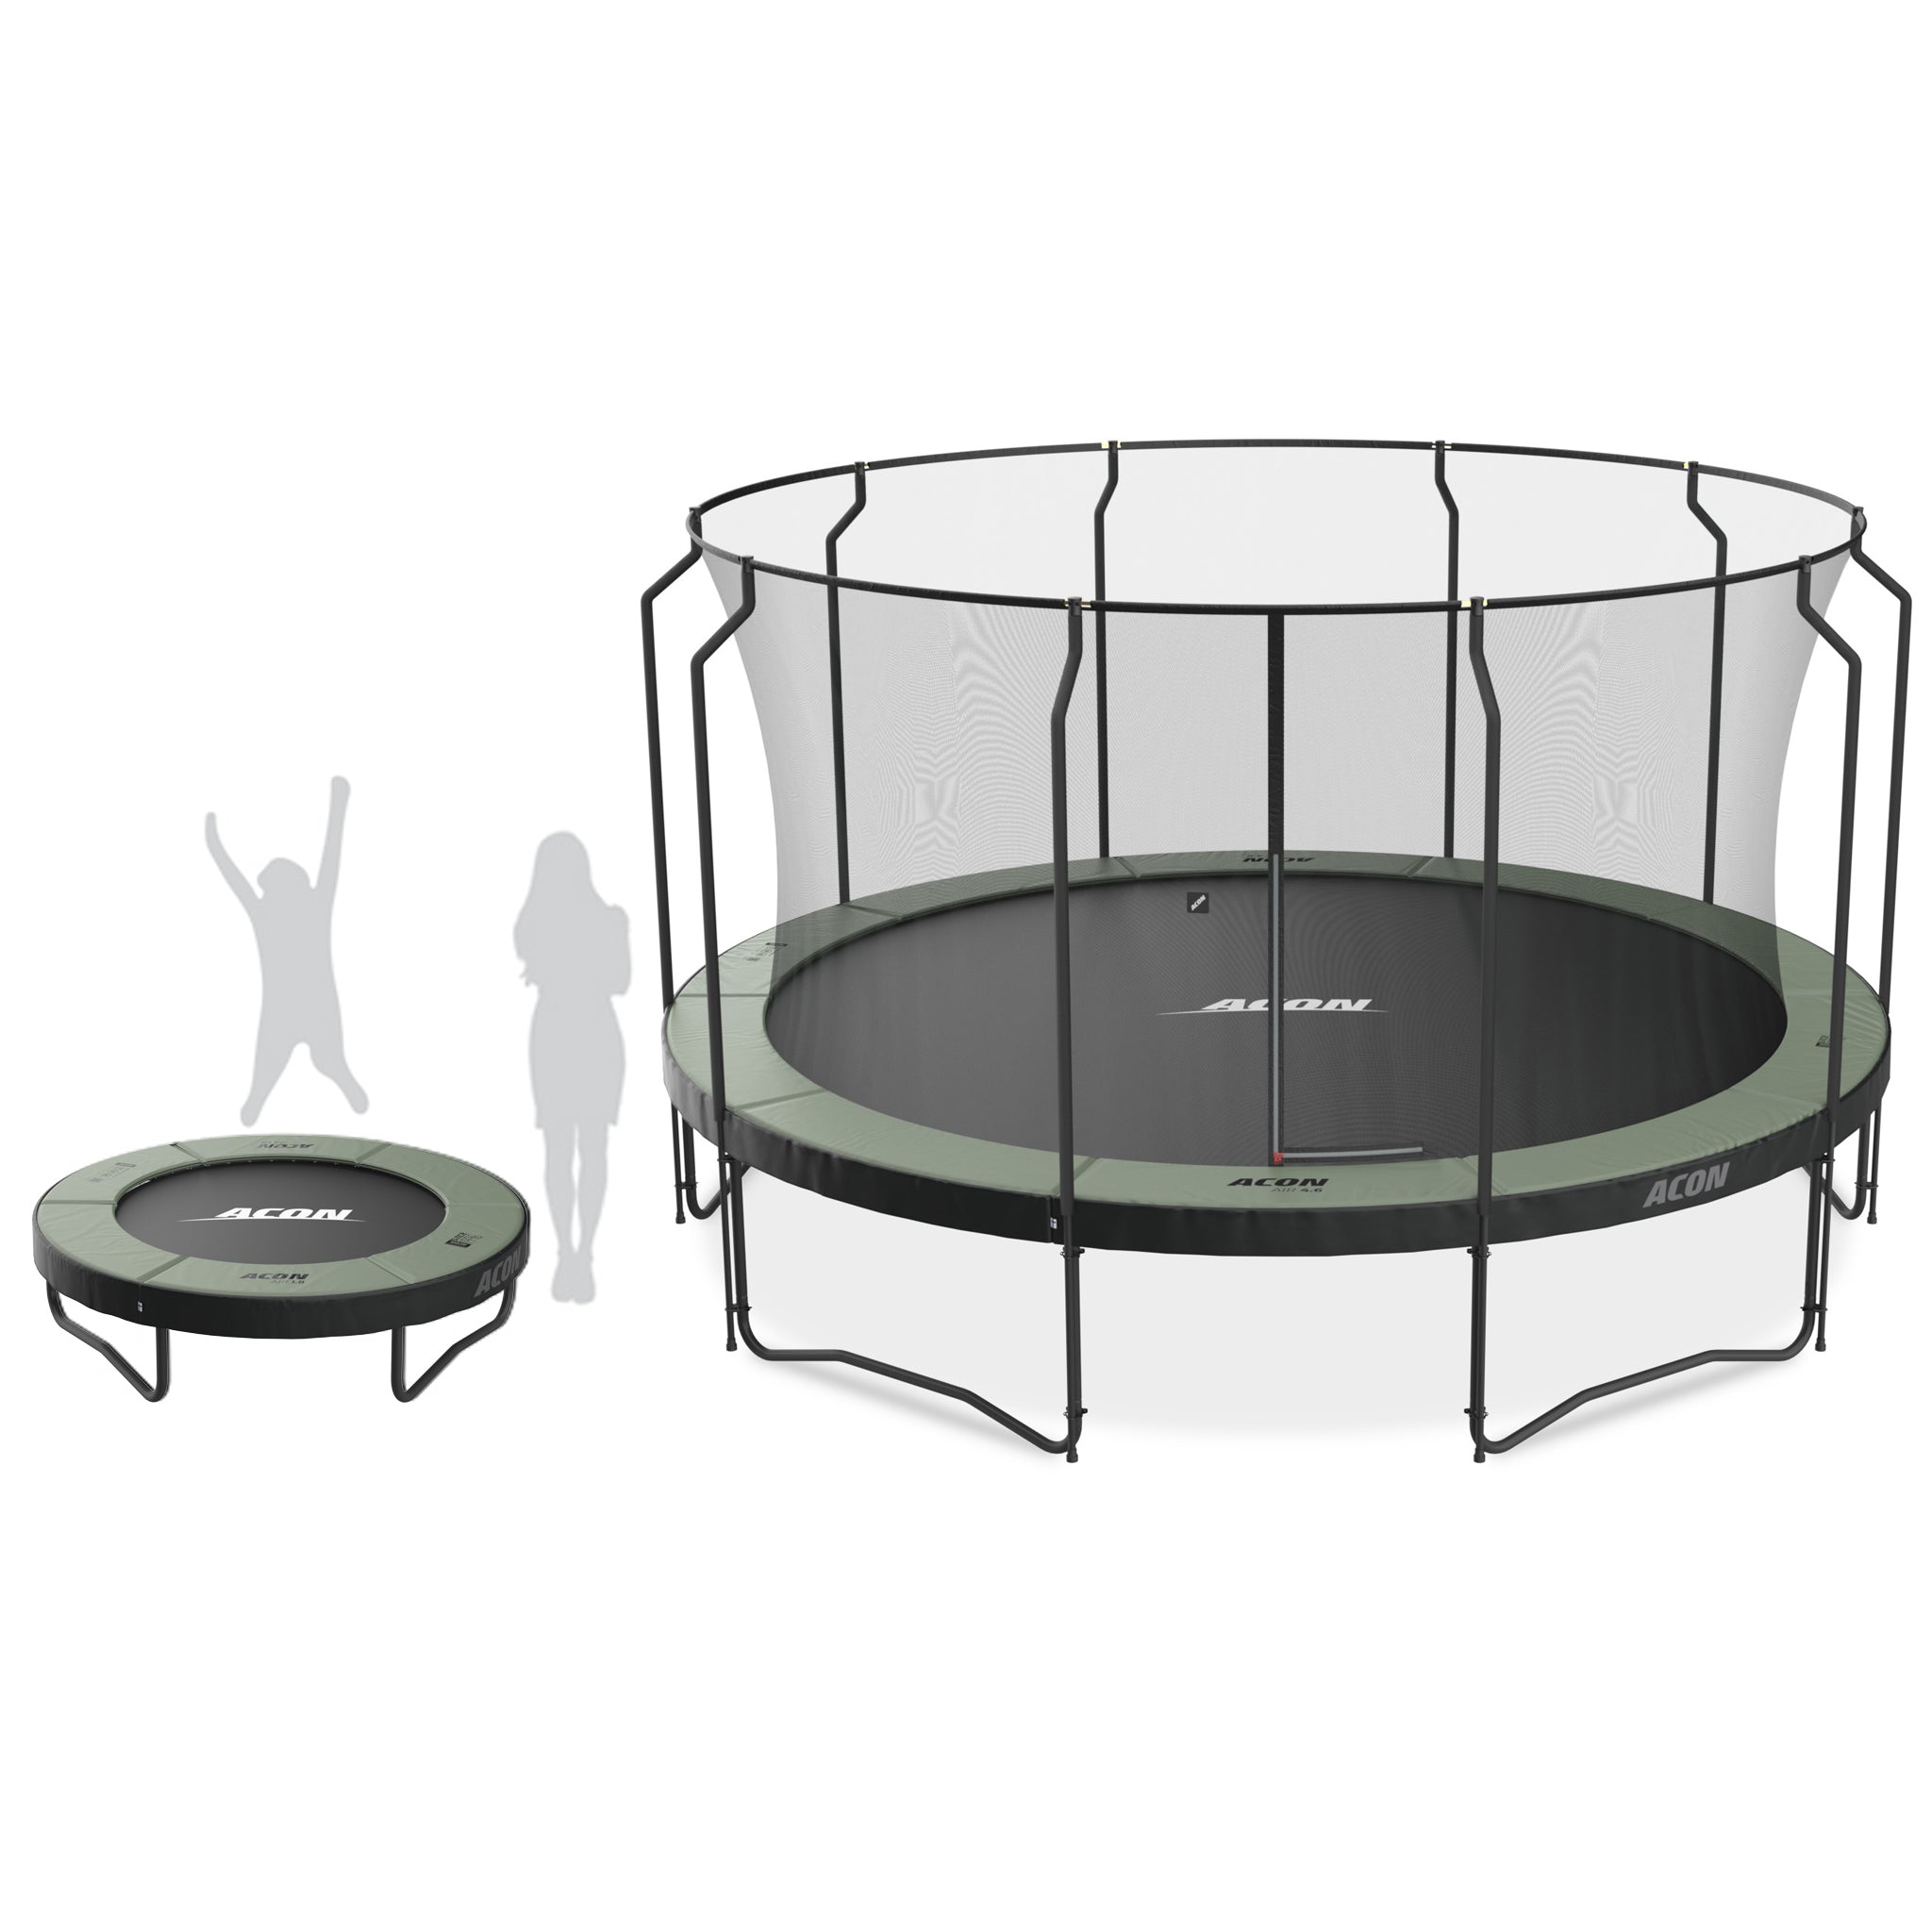 Round trampolines, small and big, in one image. There are also drafts of a child and an adult to visualize the two trampoline sizes.